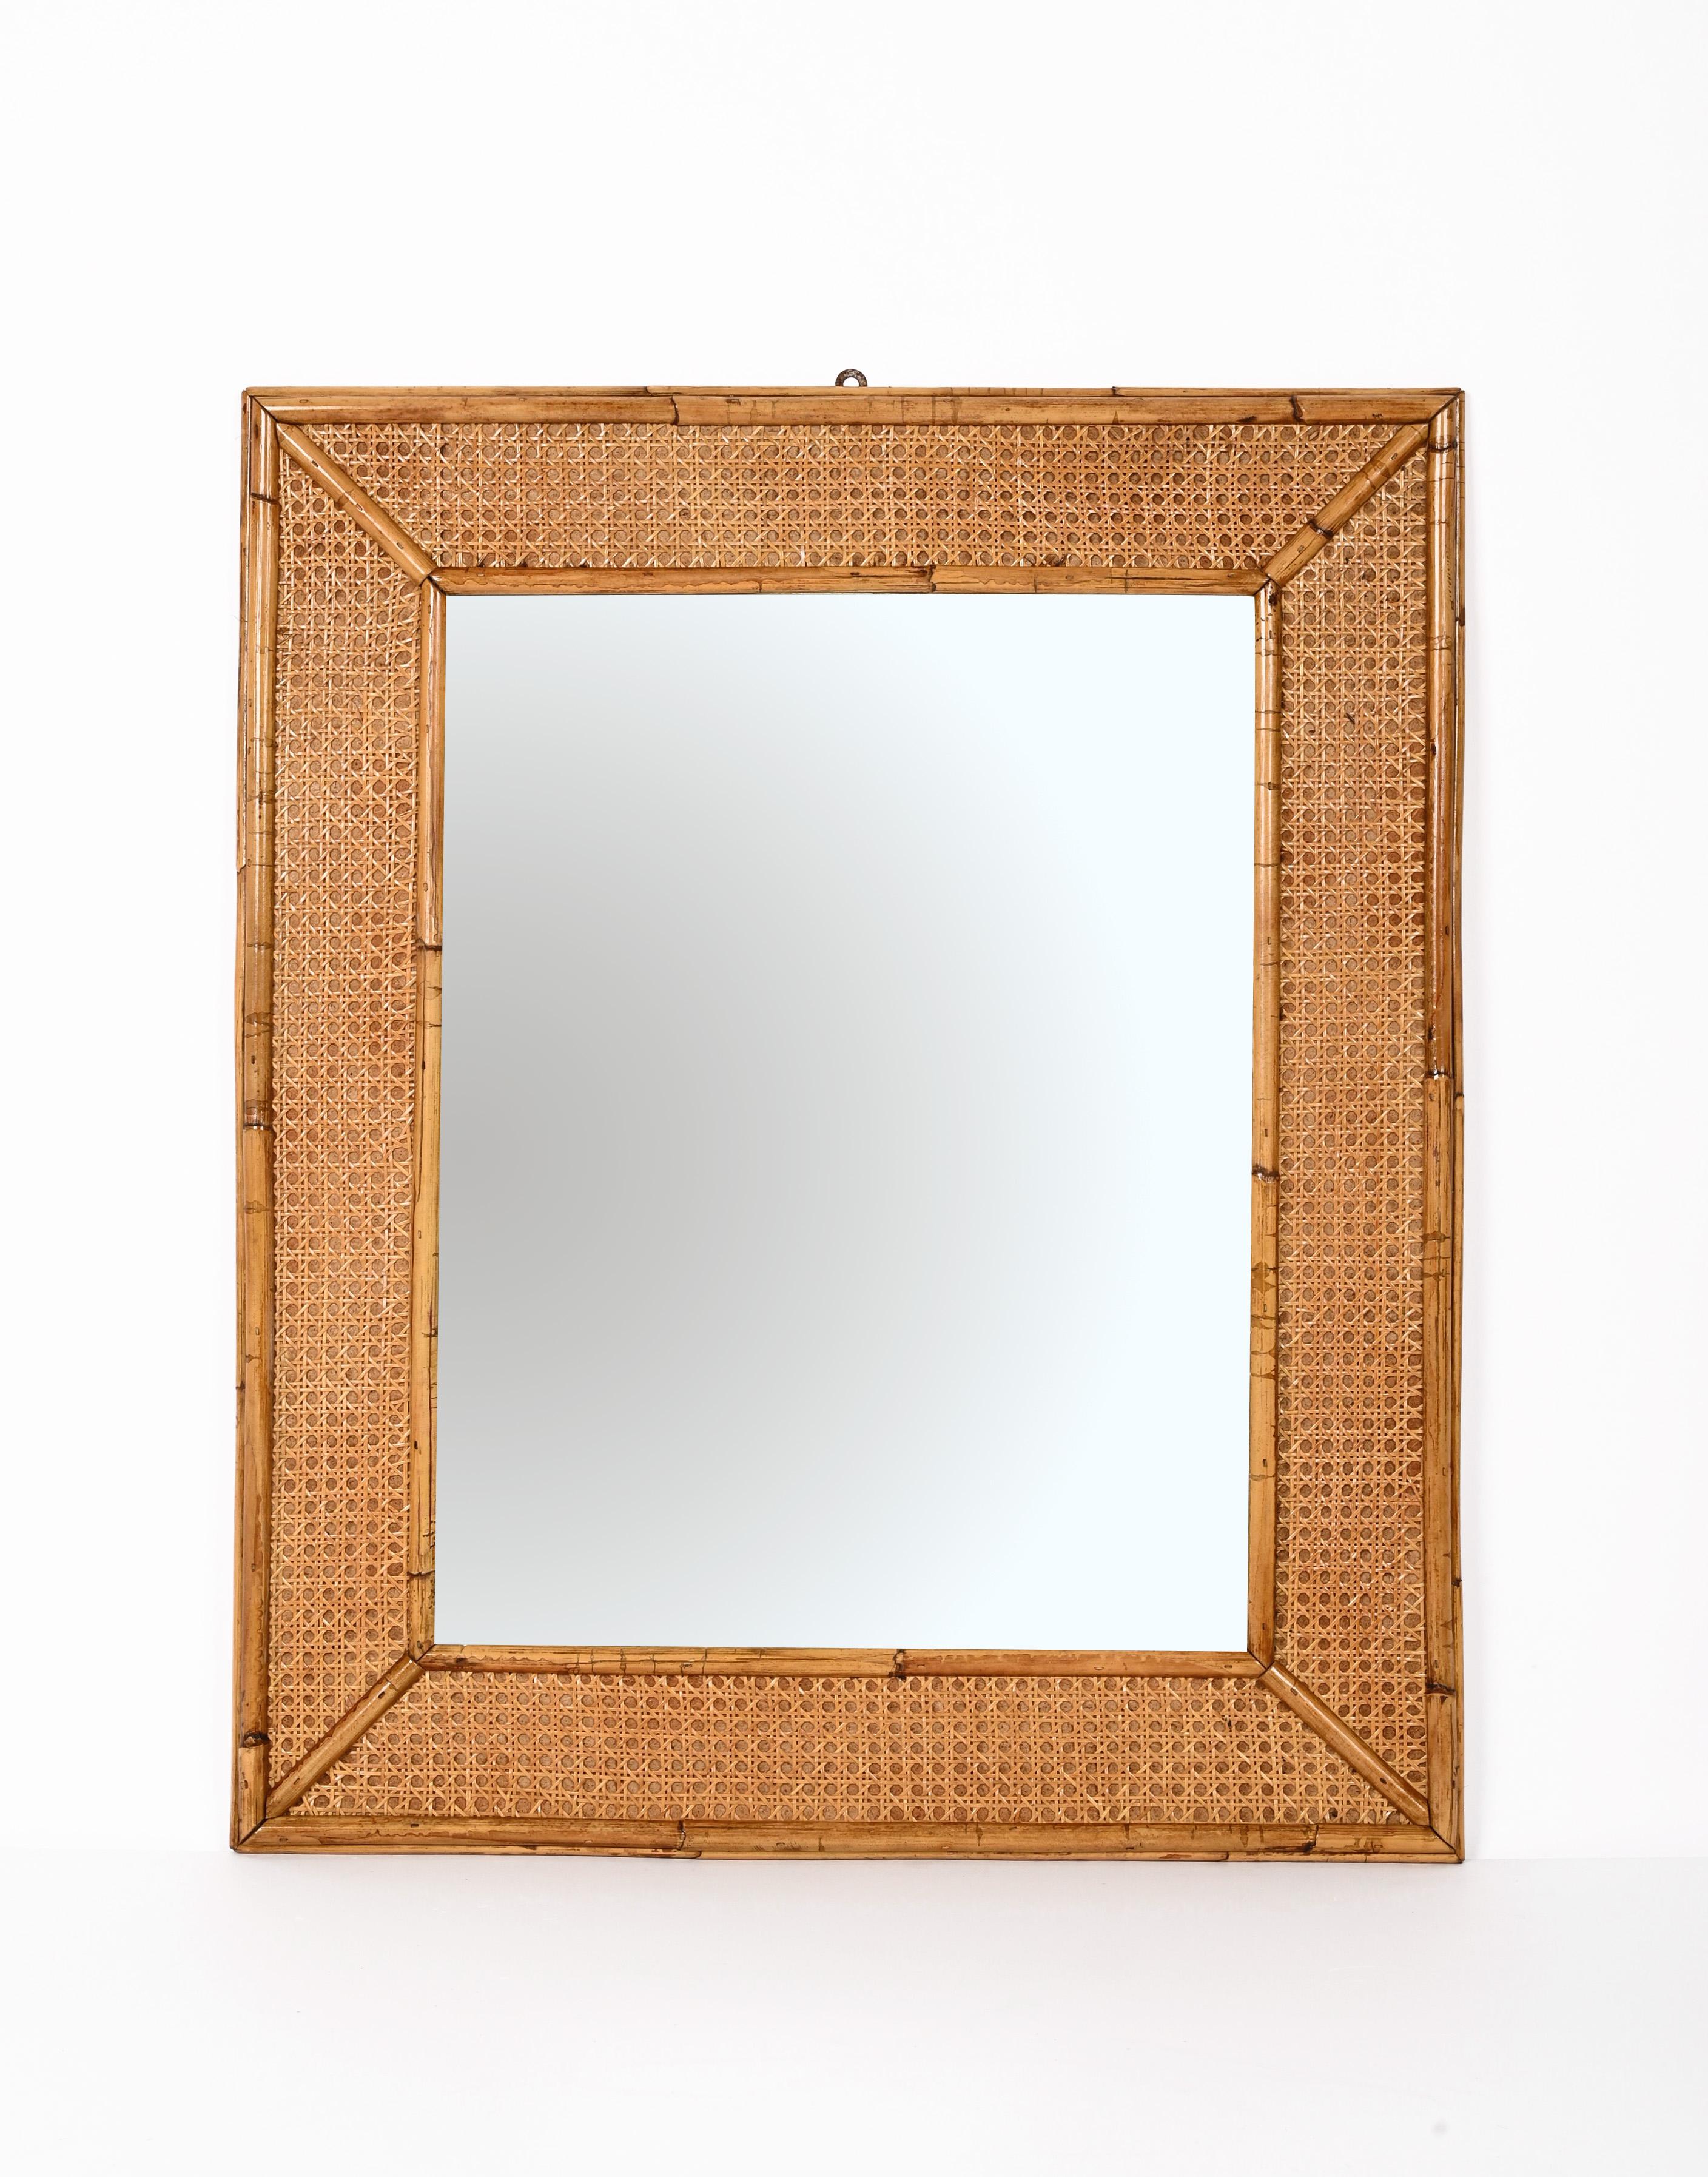 Midcentury Rectangular Italian Mirror with Bamboo and Vienna Straw Frame, 1970s For Sale 1